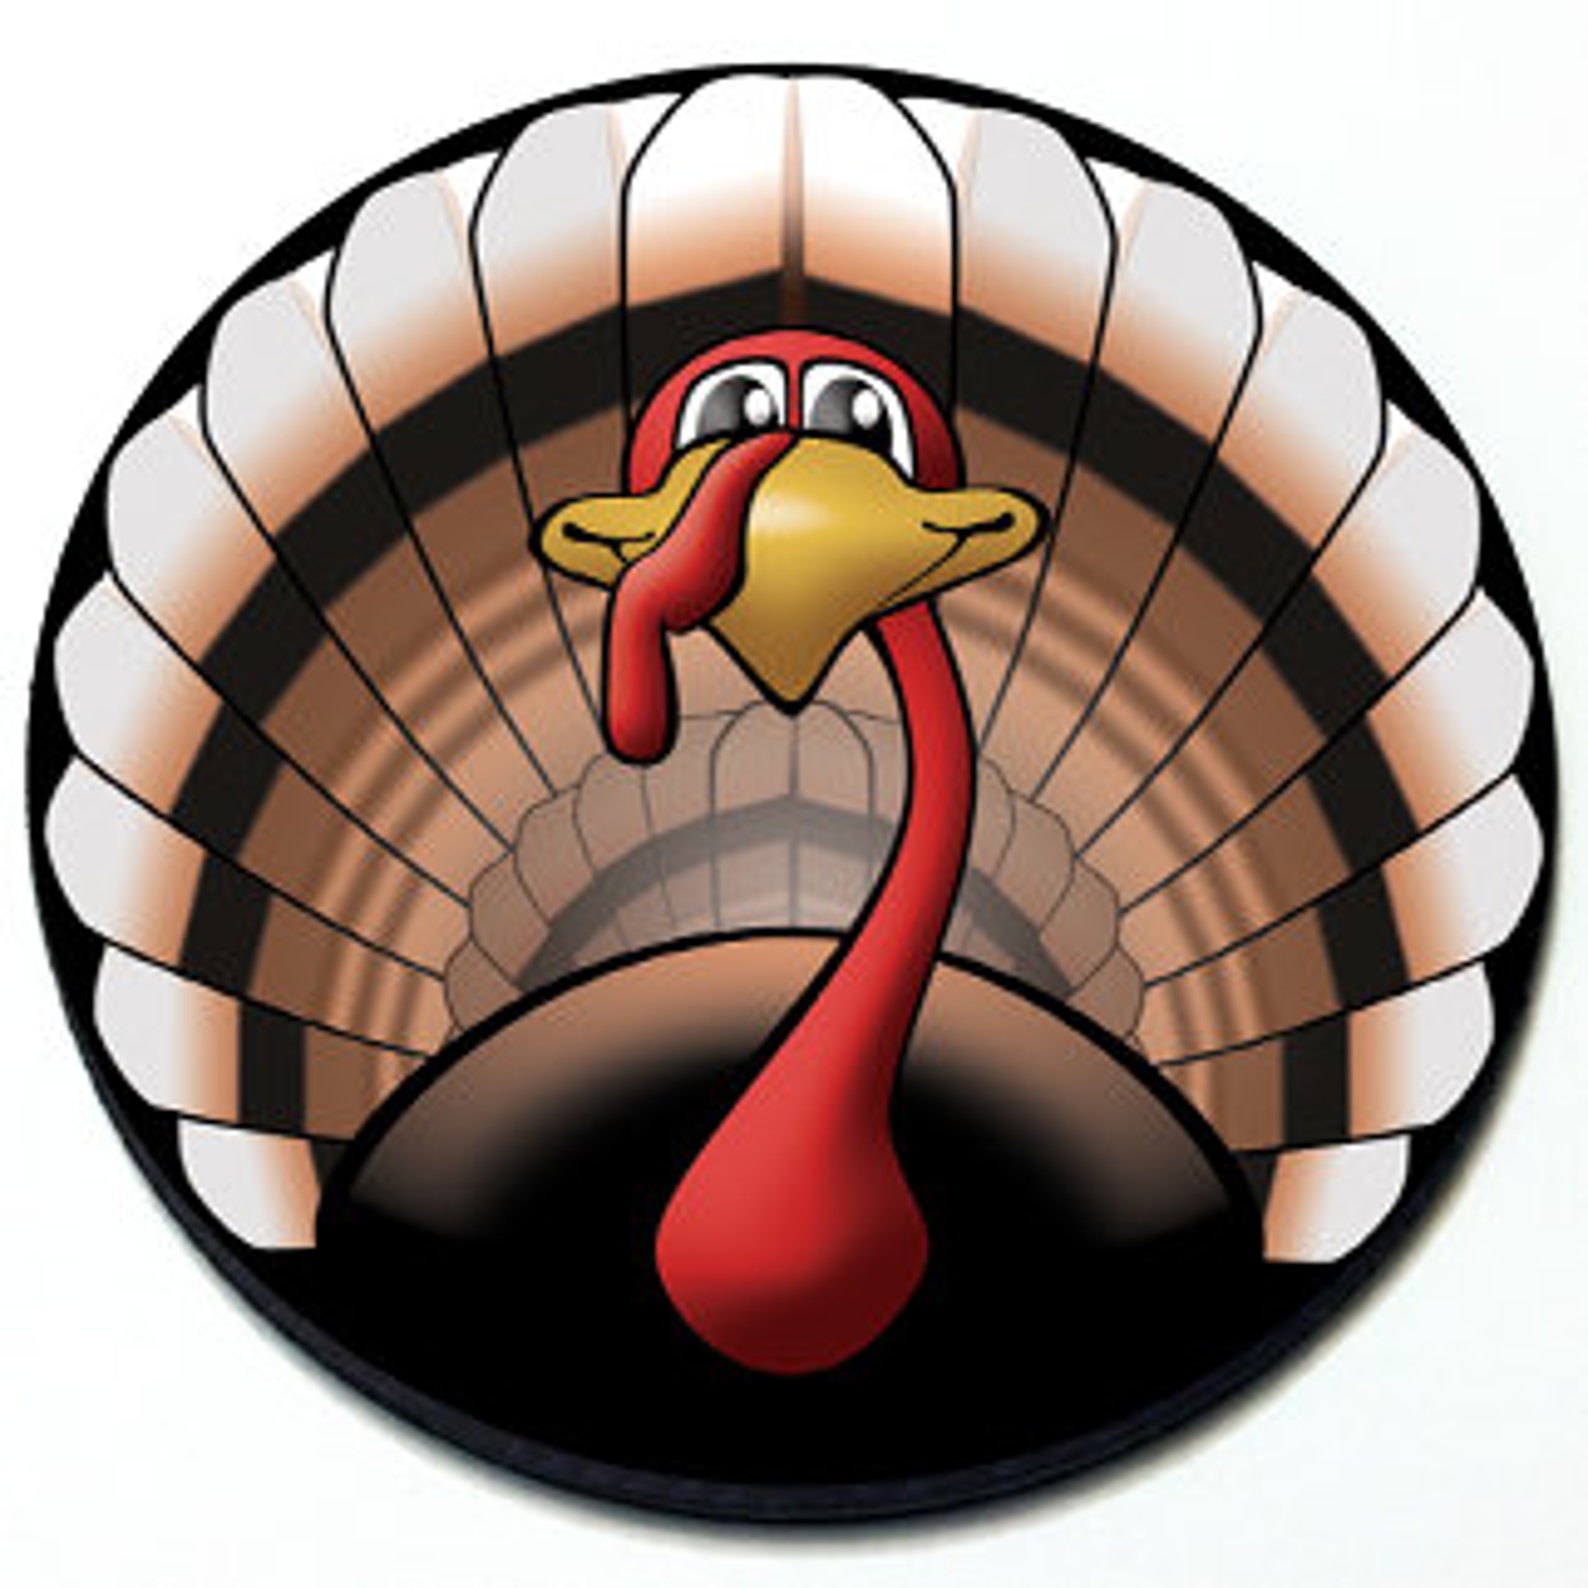 Turkey Thanksgiving Grill Badge for MINI Cooper Etsy